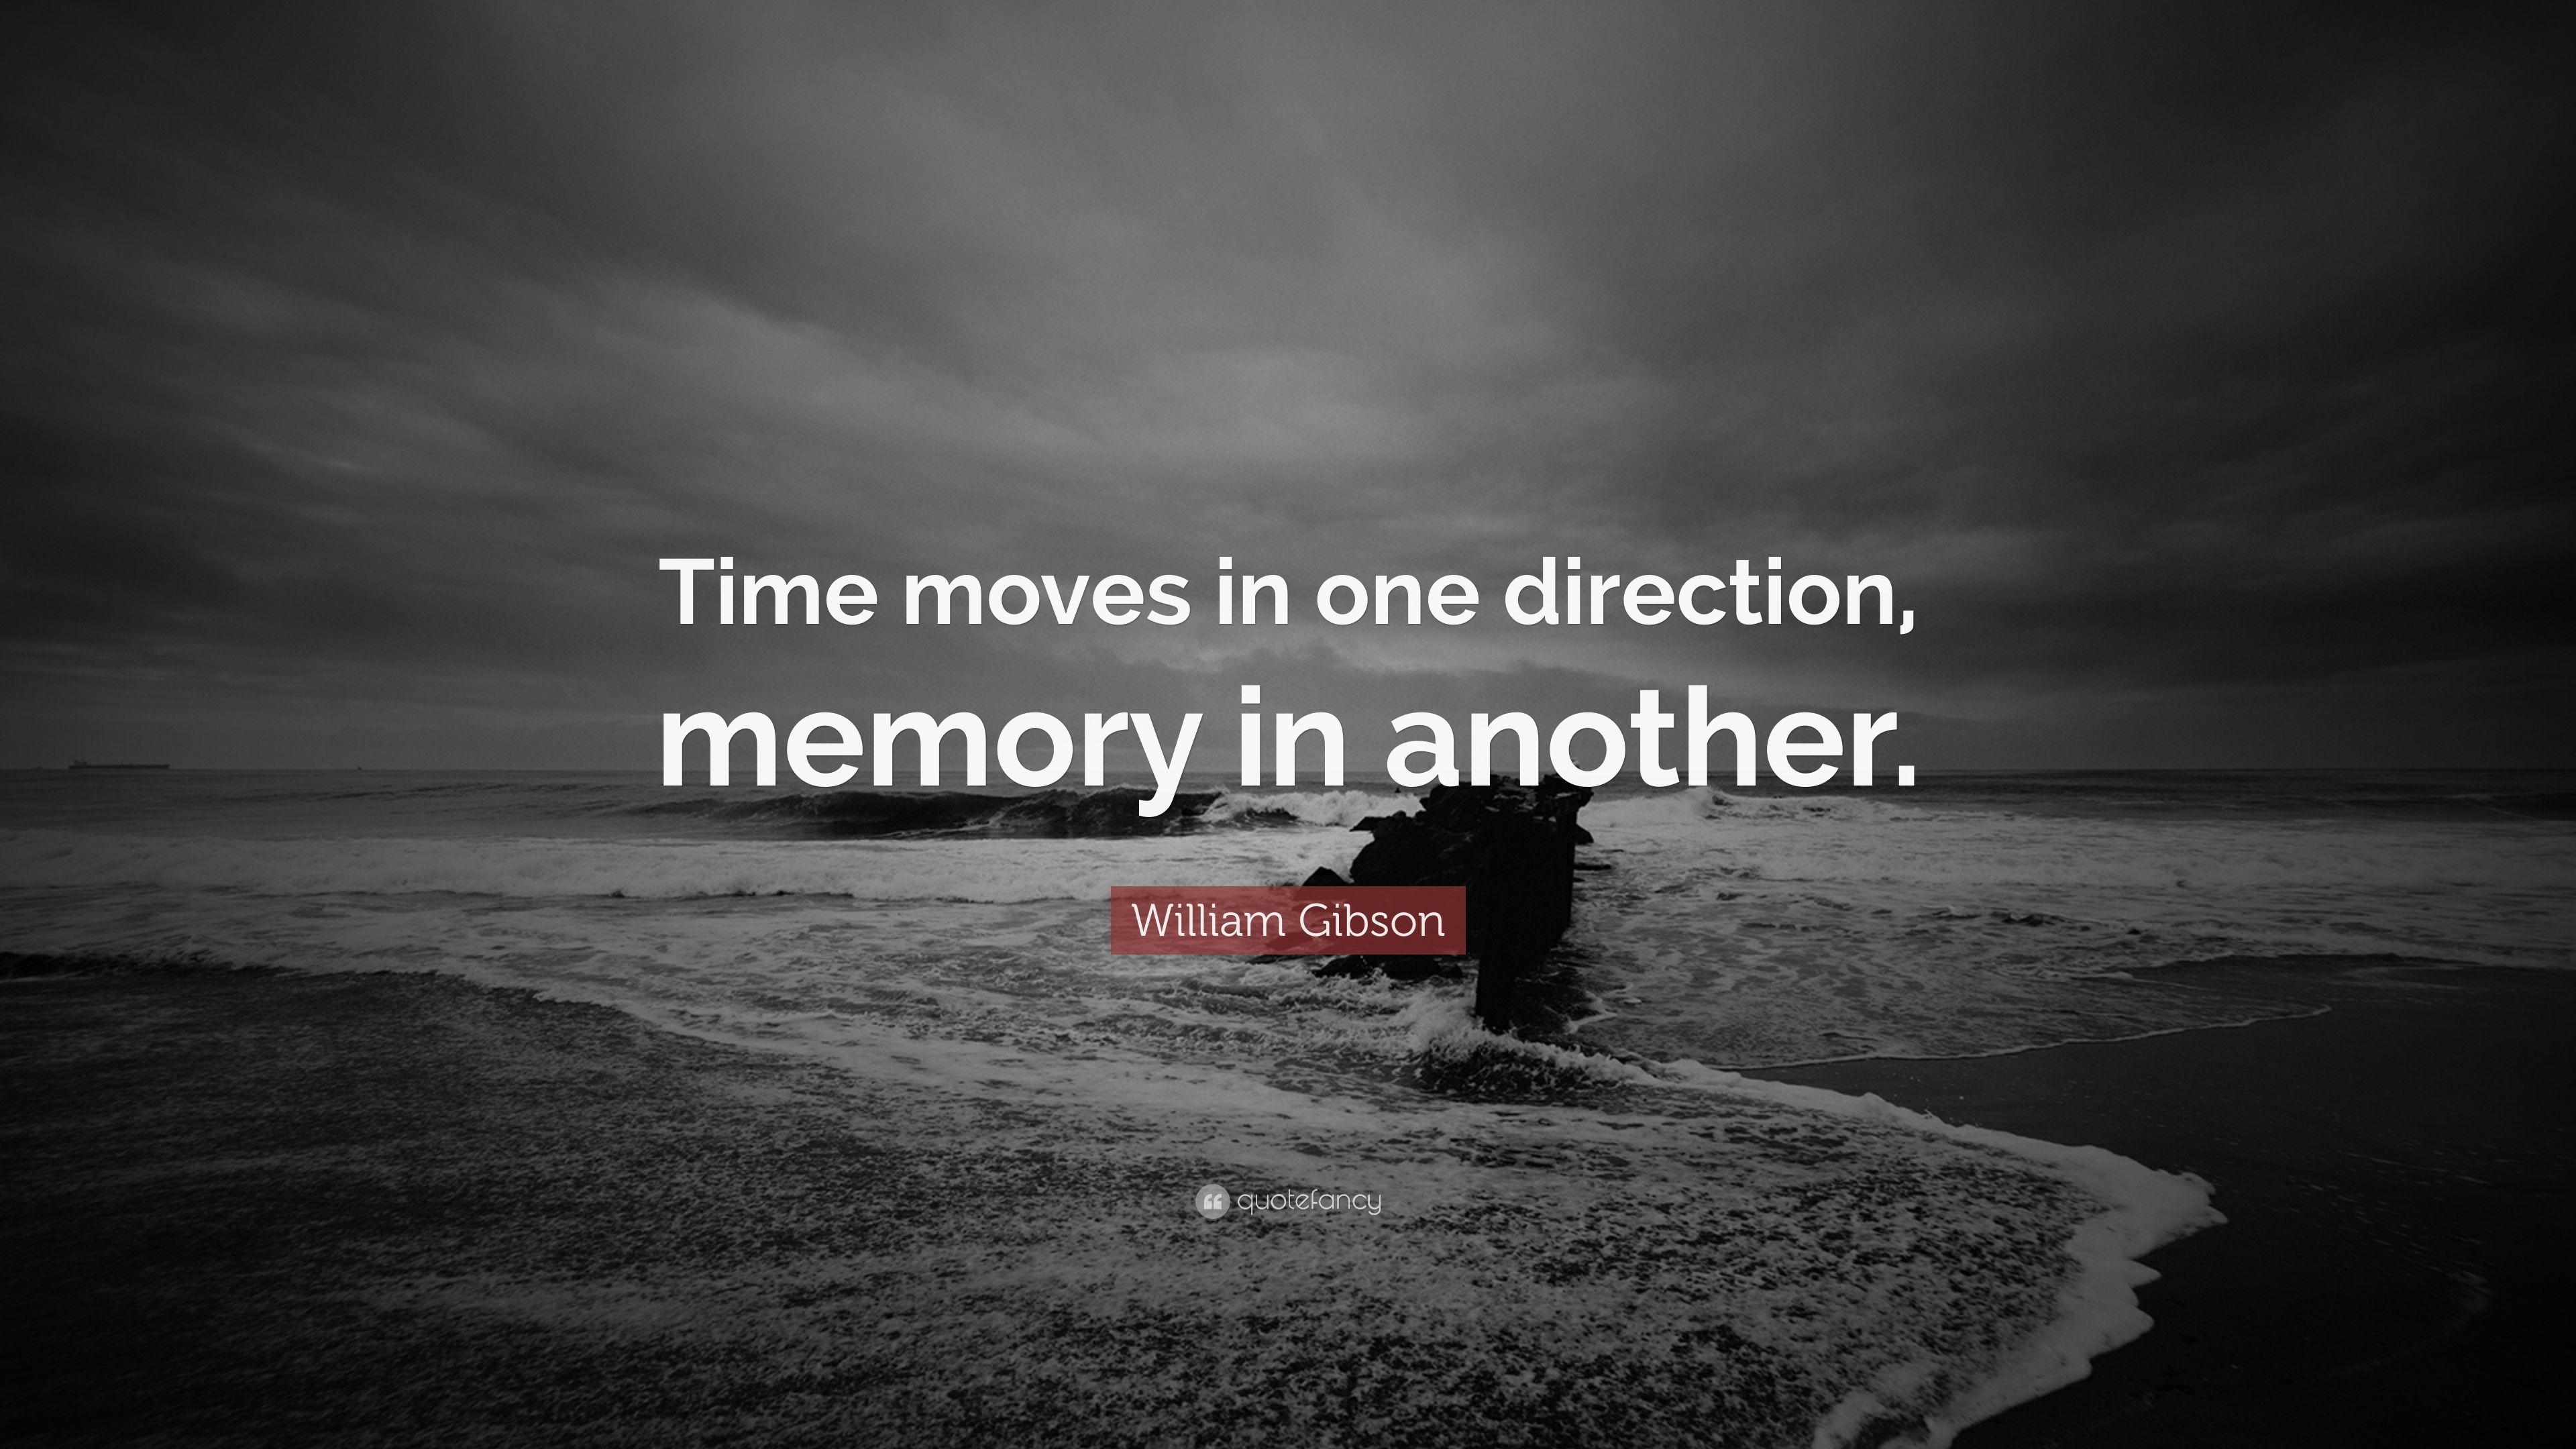 William Gibson Quote: “Time moves in one direction, memory